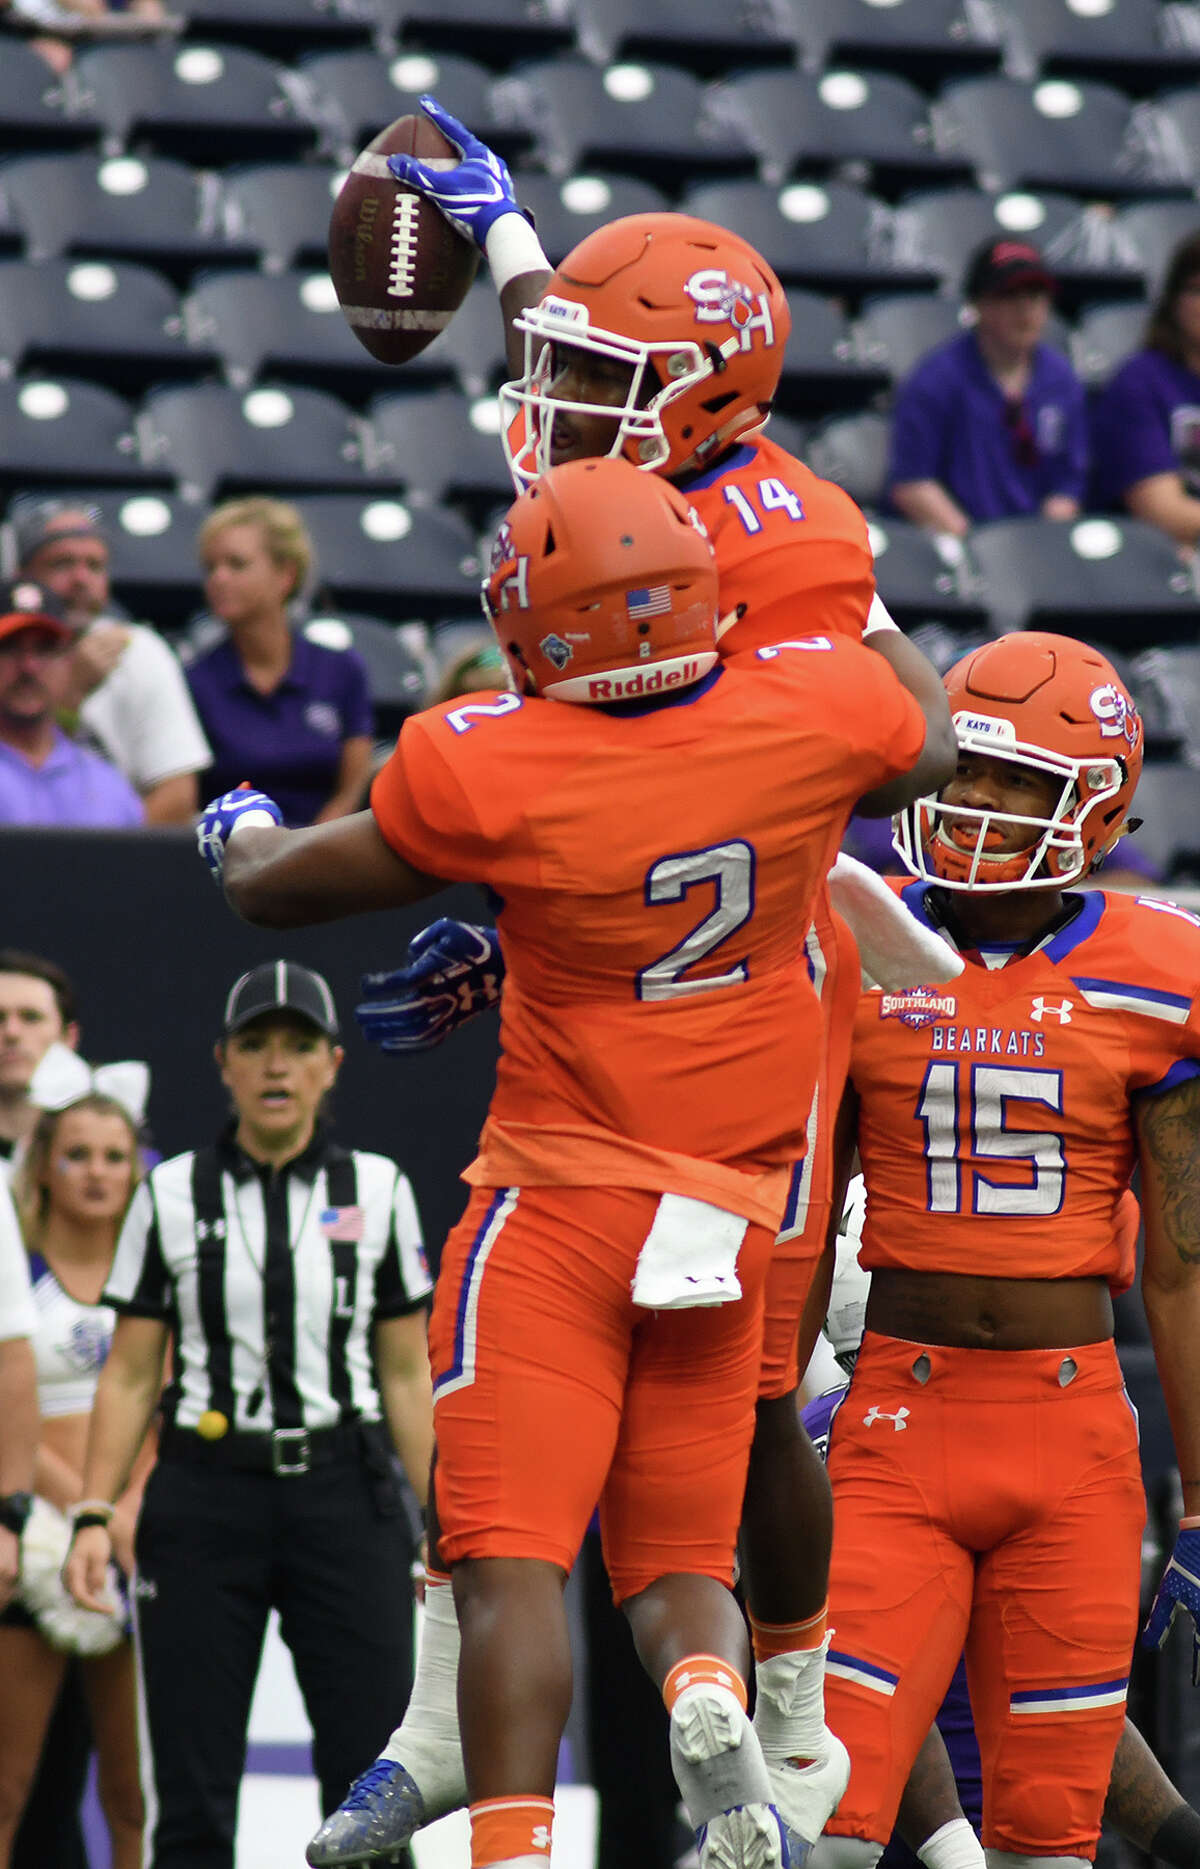 Sam Houston State junior wide receiver Davion Davis (14) celebrates his first quarter touchdown against Stephen F. Austin with teammates Tyler Scott (2) and Coree Compton (15) during their Battle of the Piney Woods clash at NRG Stadium in Houston on Saturday, Oct. 7, 2017. (Photo by Jerry Baker/Freelance)